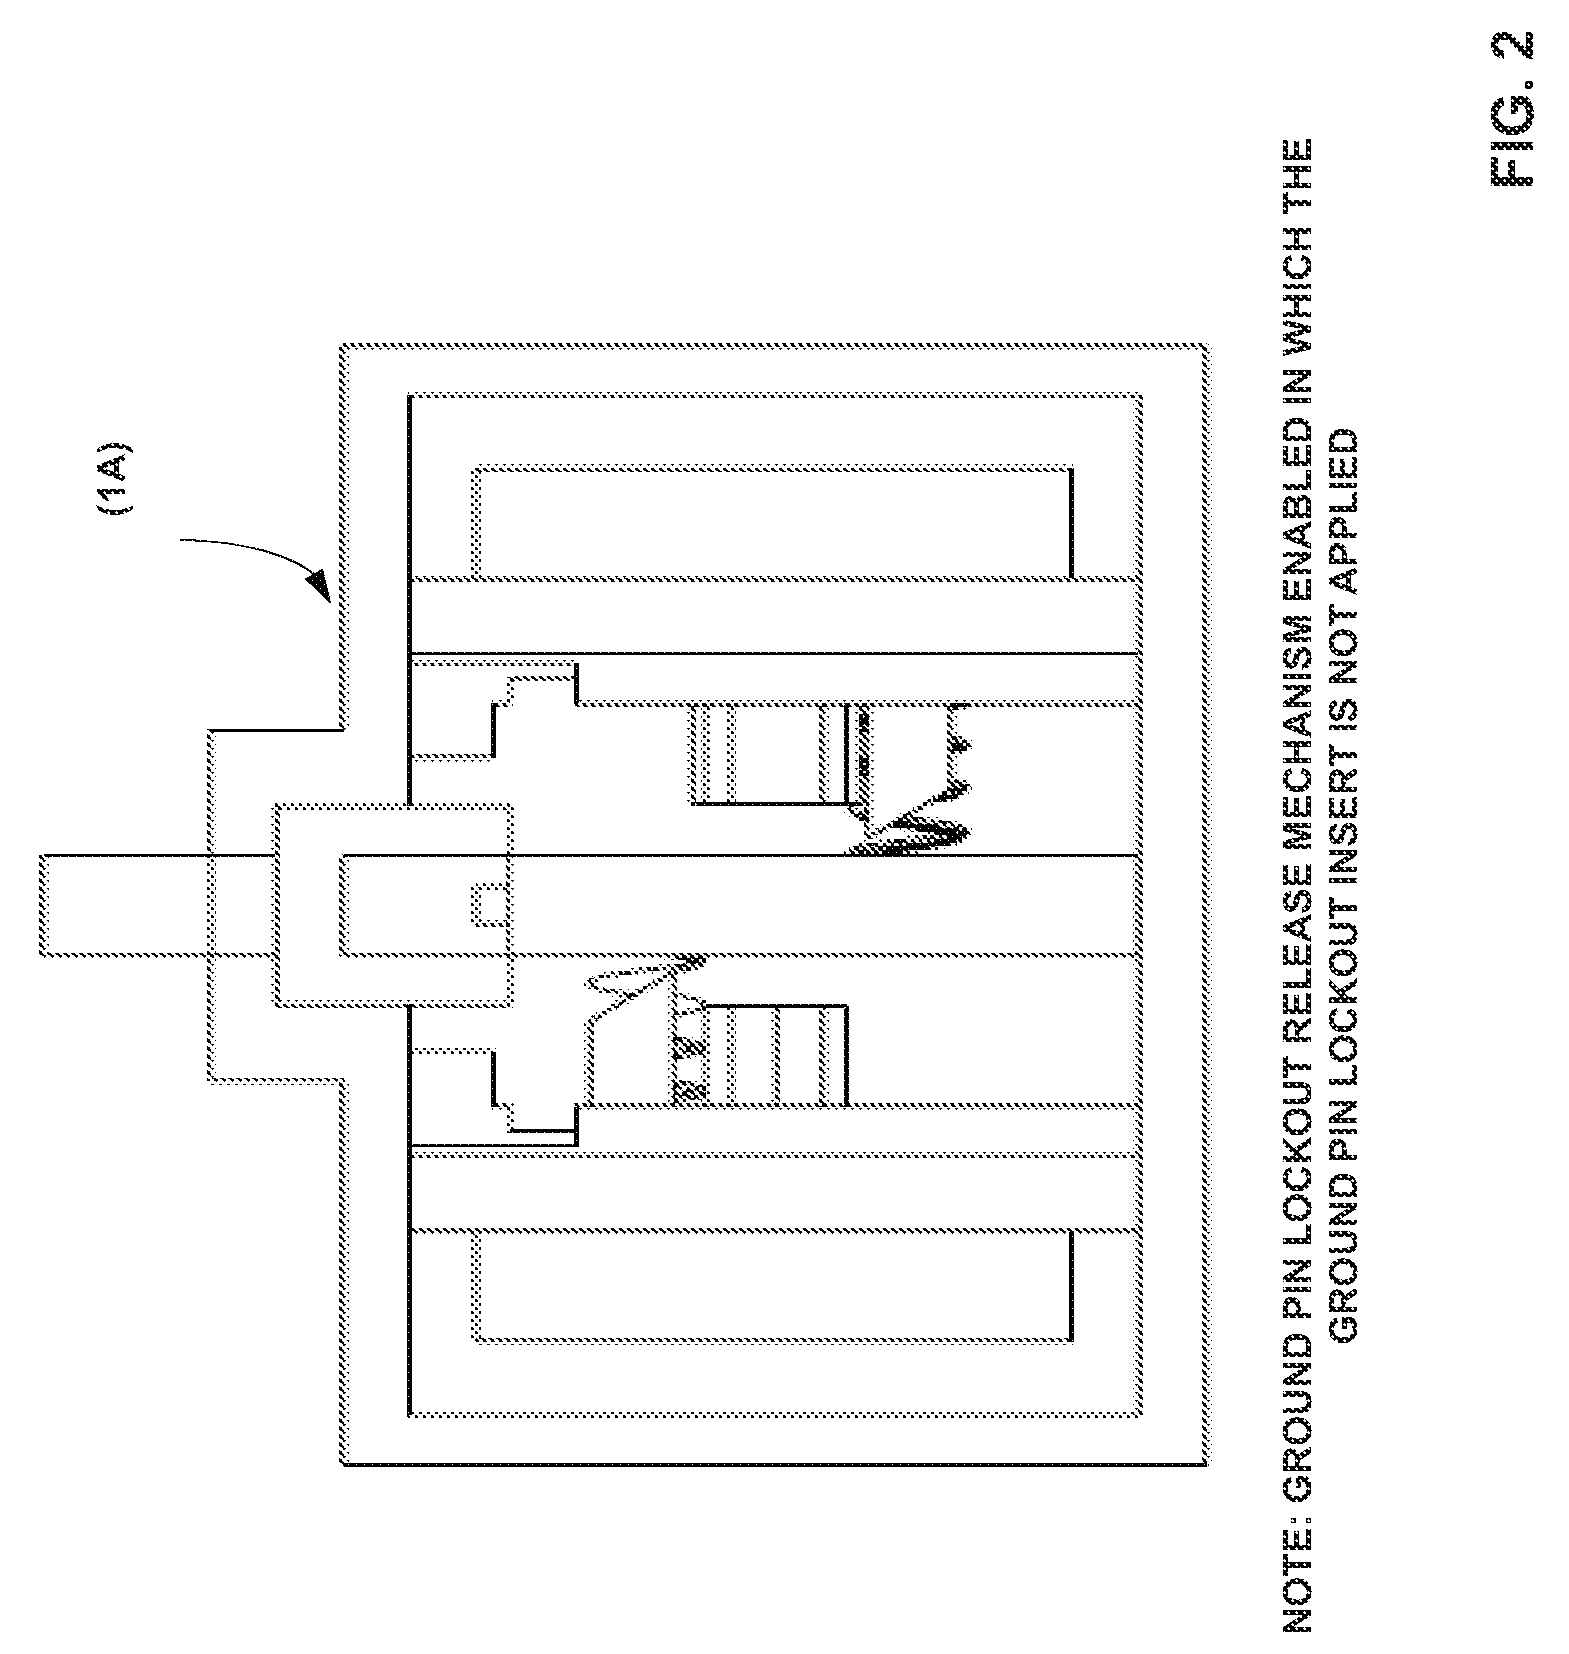 Tamper resistant shutter device for electrical receptacle outlets